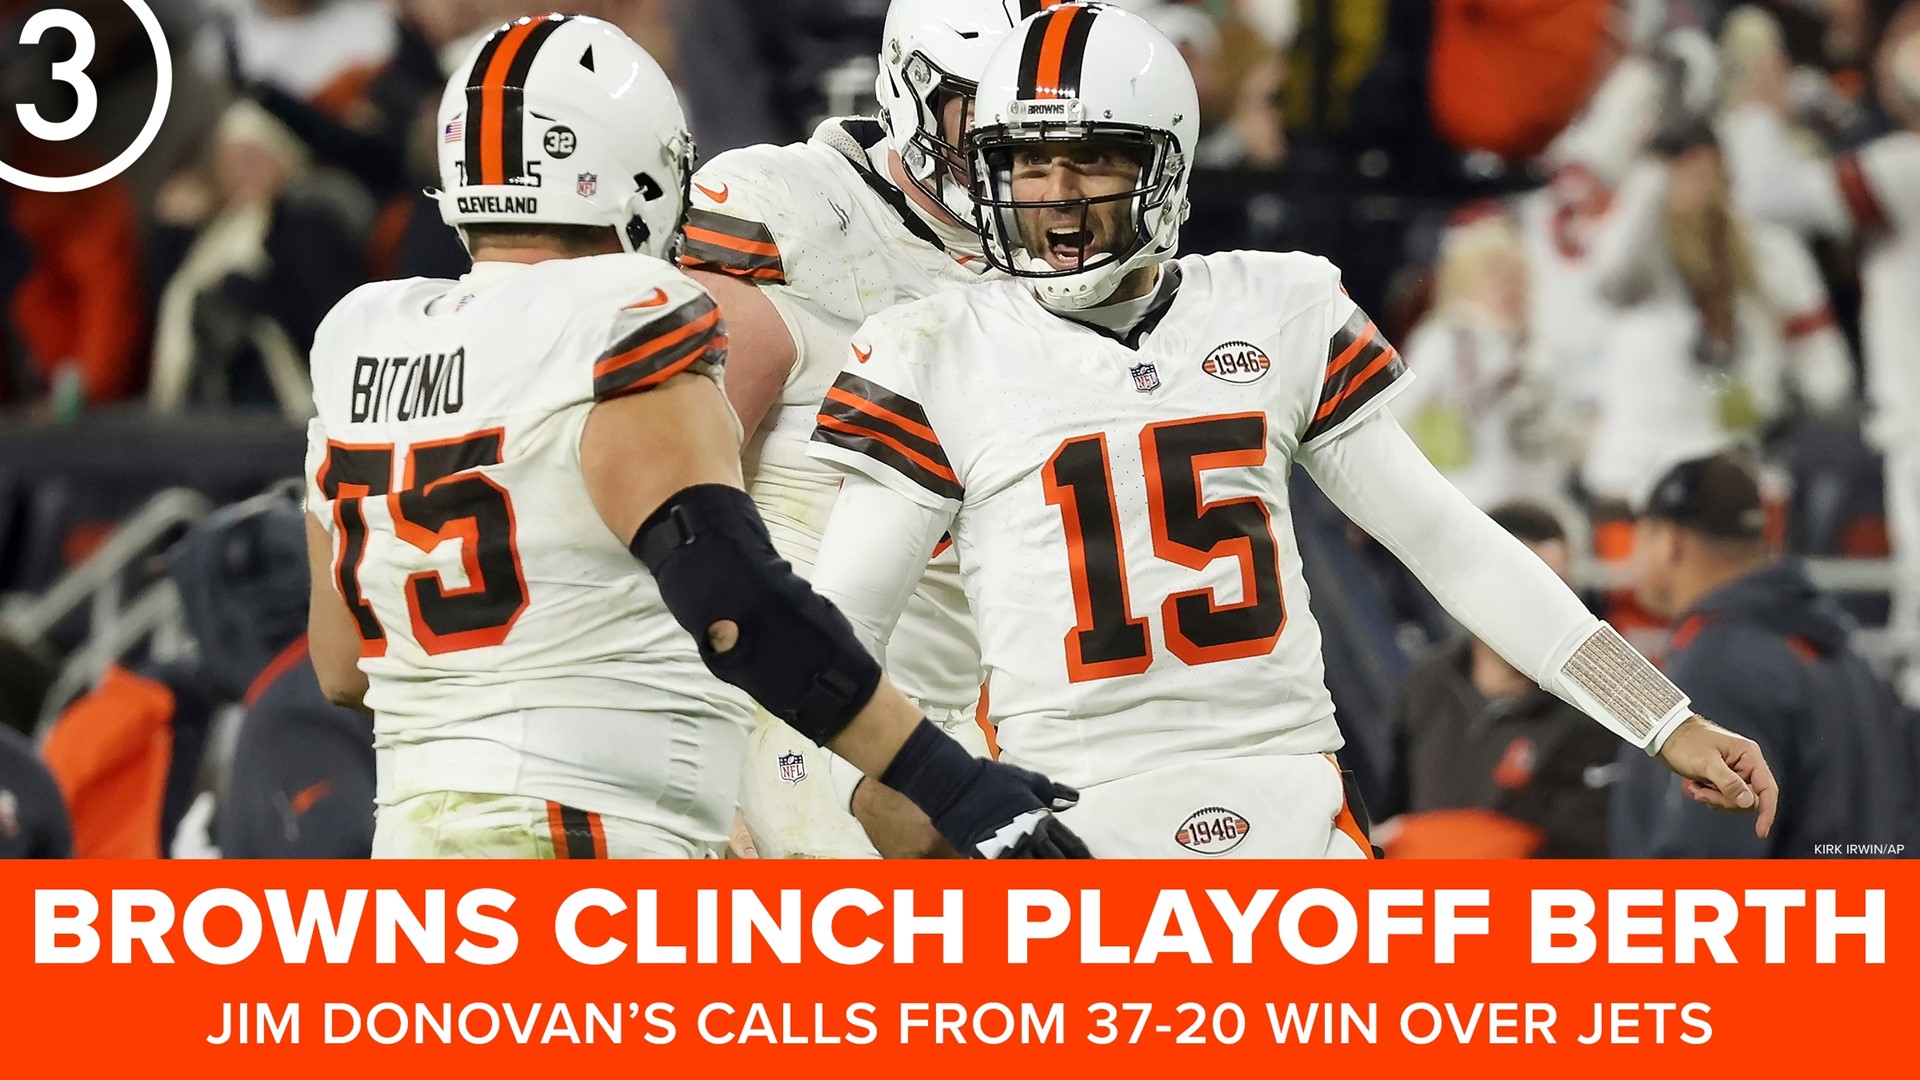 The Browns beat the Jets 37-20 to secure a postseason bid.